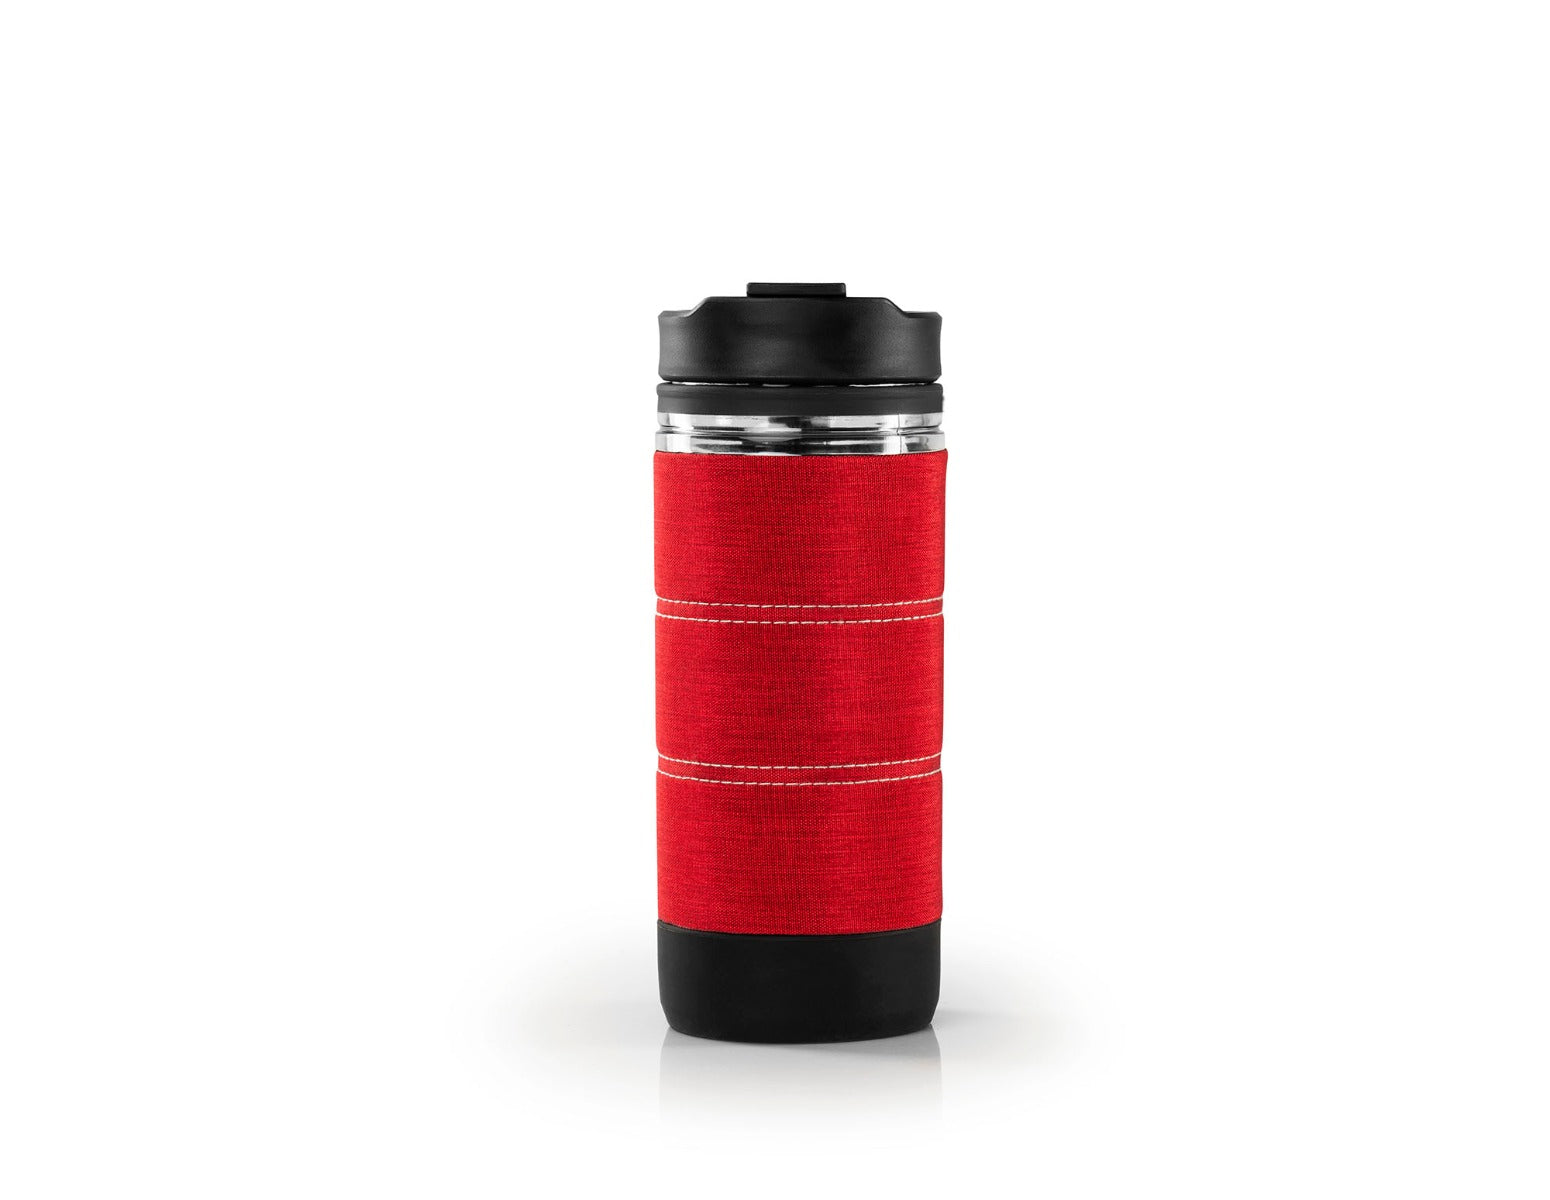 GSI Outdoors Commuter JavaPress, a personal french press on the go